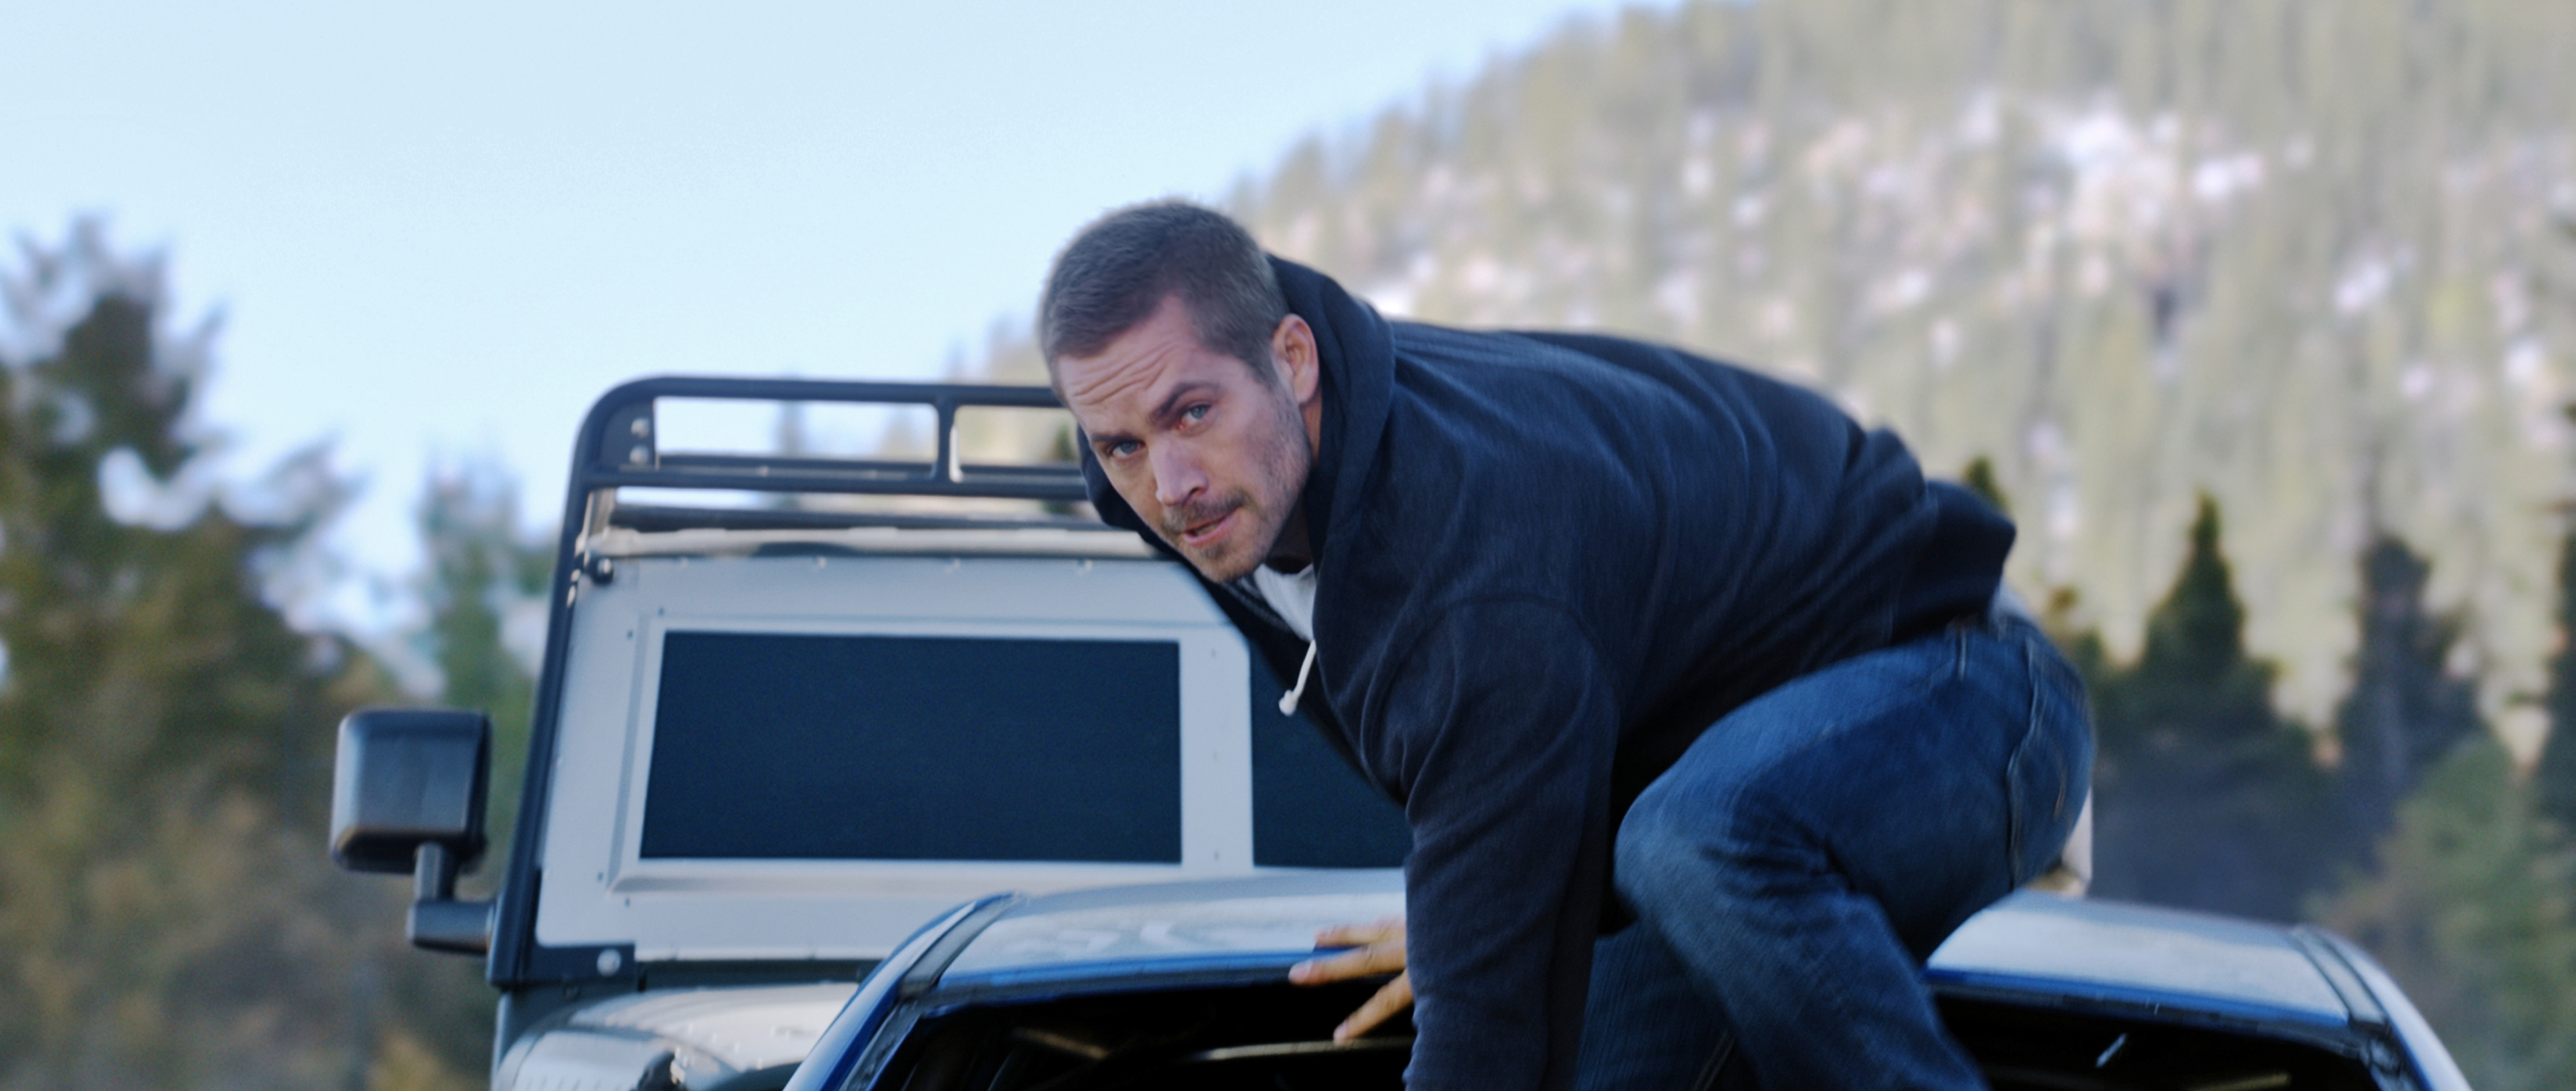 Furious 7 download the last version for windows